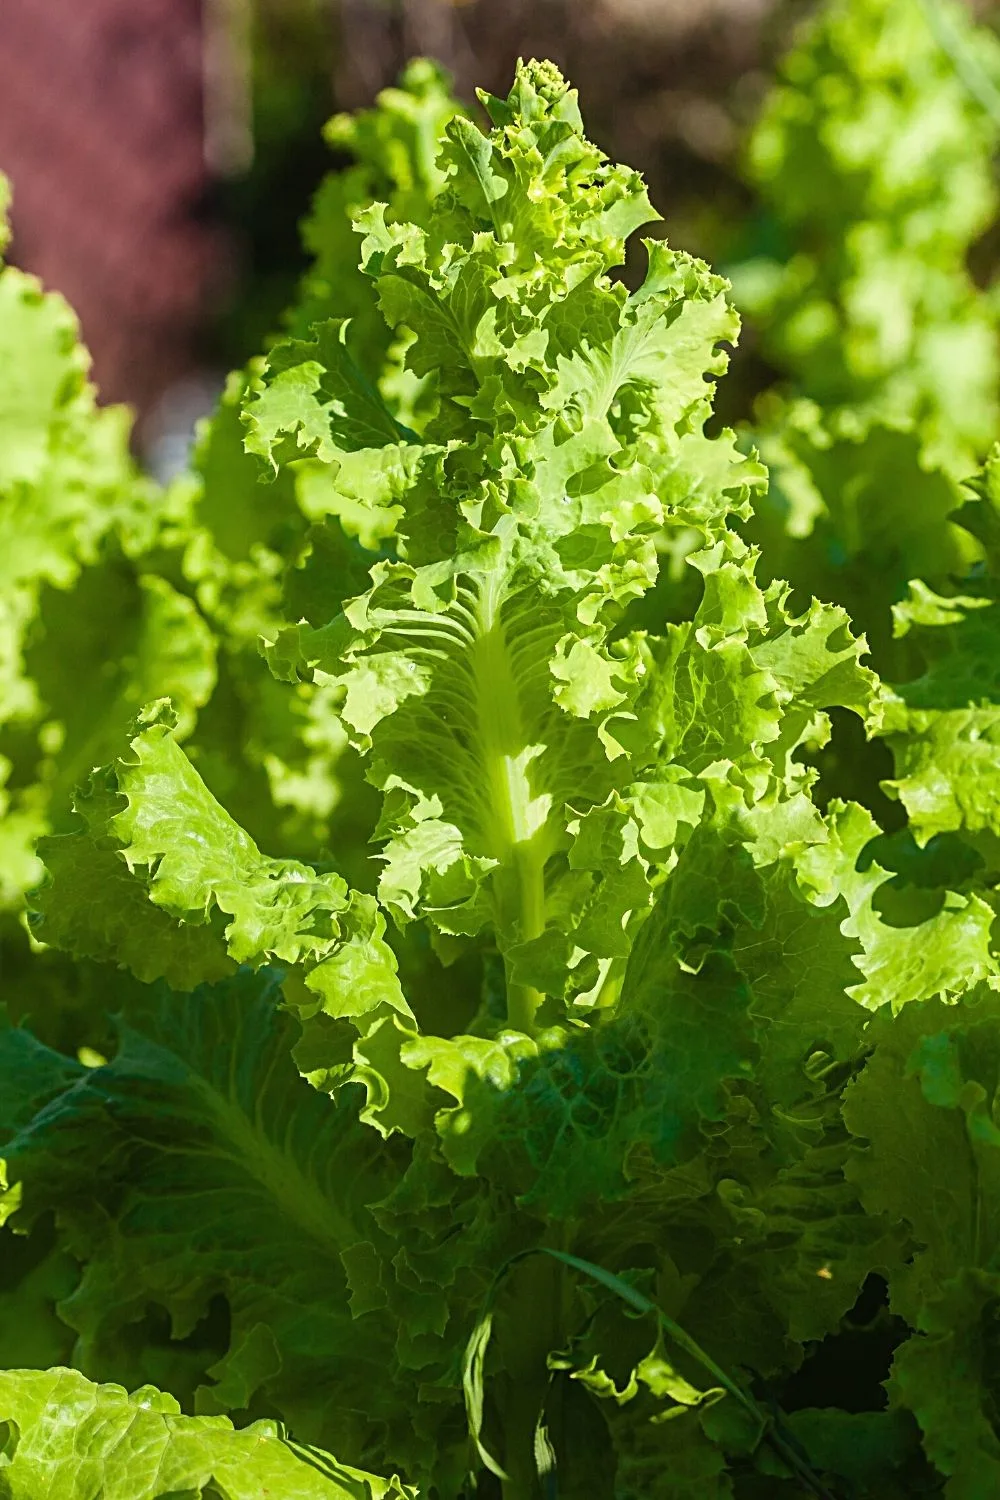 Lettuce is another vegetable that you can easily grow on north-facing balconies